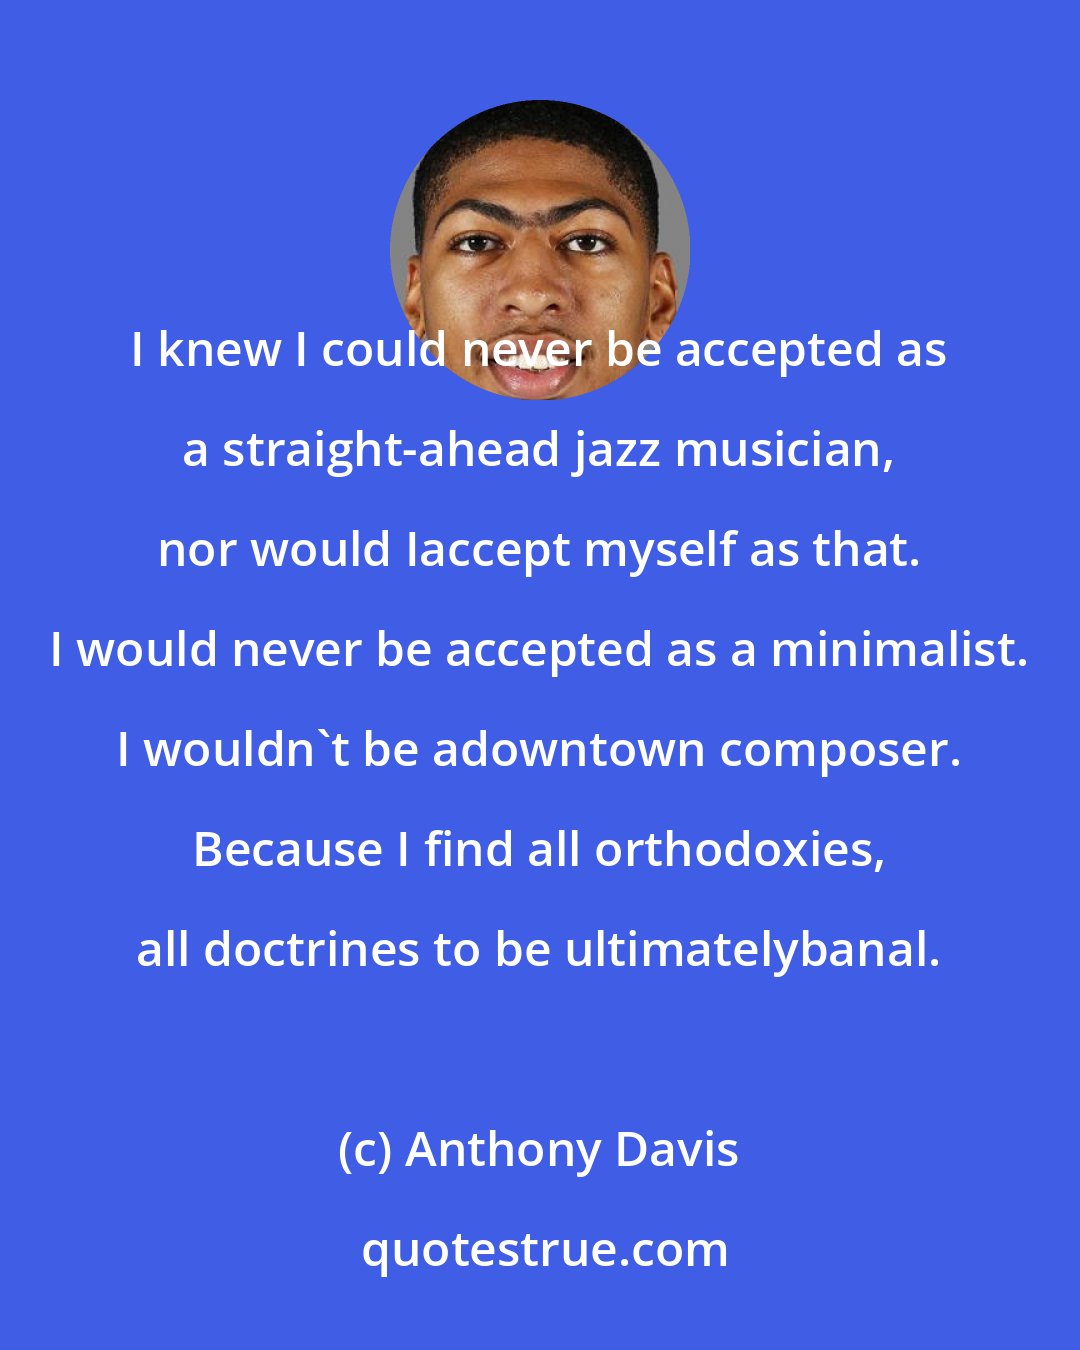 Anthony Davis: I knew I could never be accepted as a straight-ahead jazz musician, nor would Iaccept myself as that. I would never be accepted as a minimalist. I wouldn't be adowntown composer. Because I find all orthodoxies, all doctrines to be ultimatelybanal.